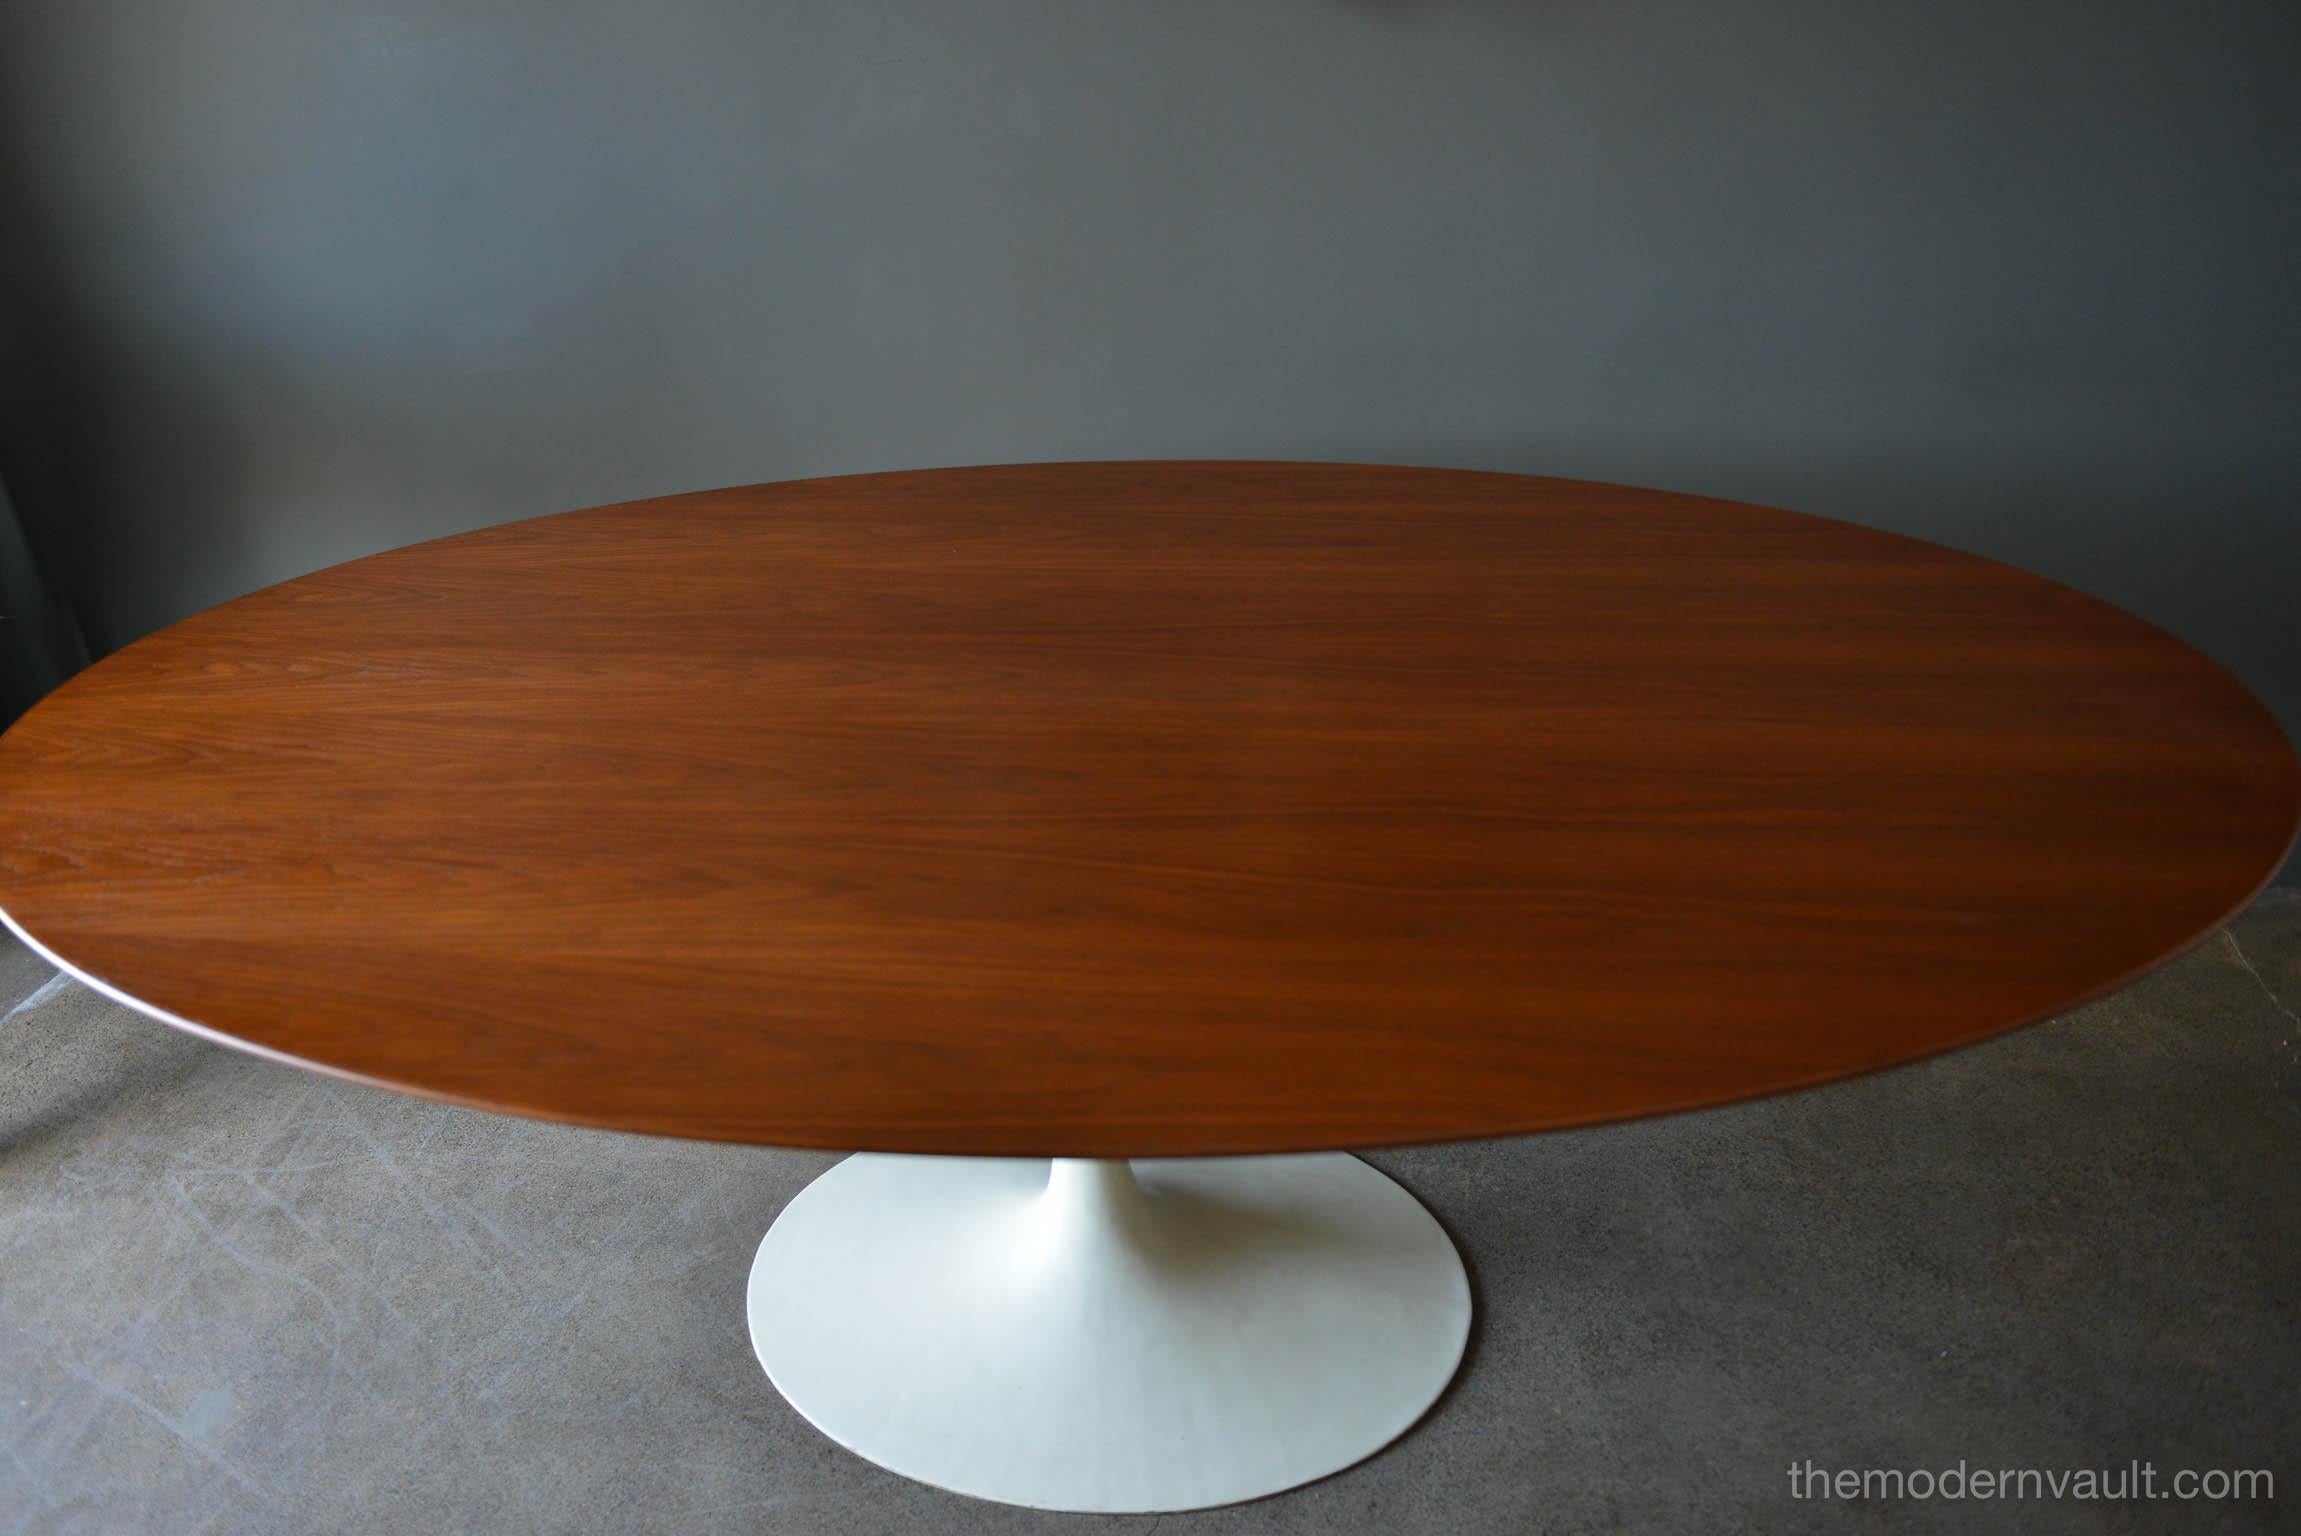 Rare early Eero Saarinen for Knoll Associates oval walnut tulip table. tabletop has been professionally restored in showroom condition. Base is solid cast iron, not hollow, indicating an early model circa 1960. Beautiful lines, sourced from a one